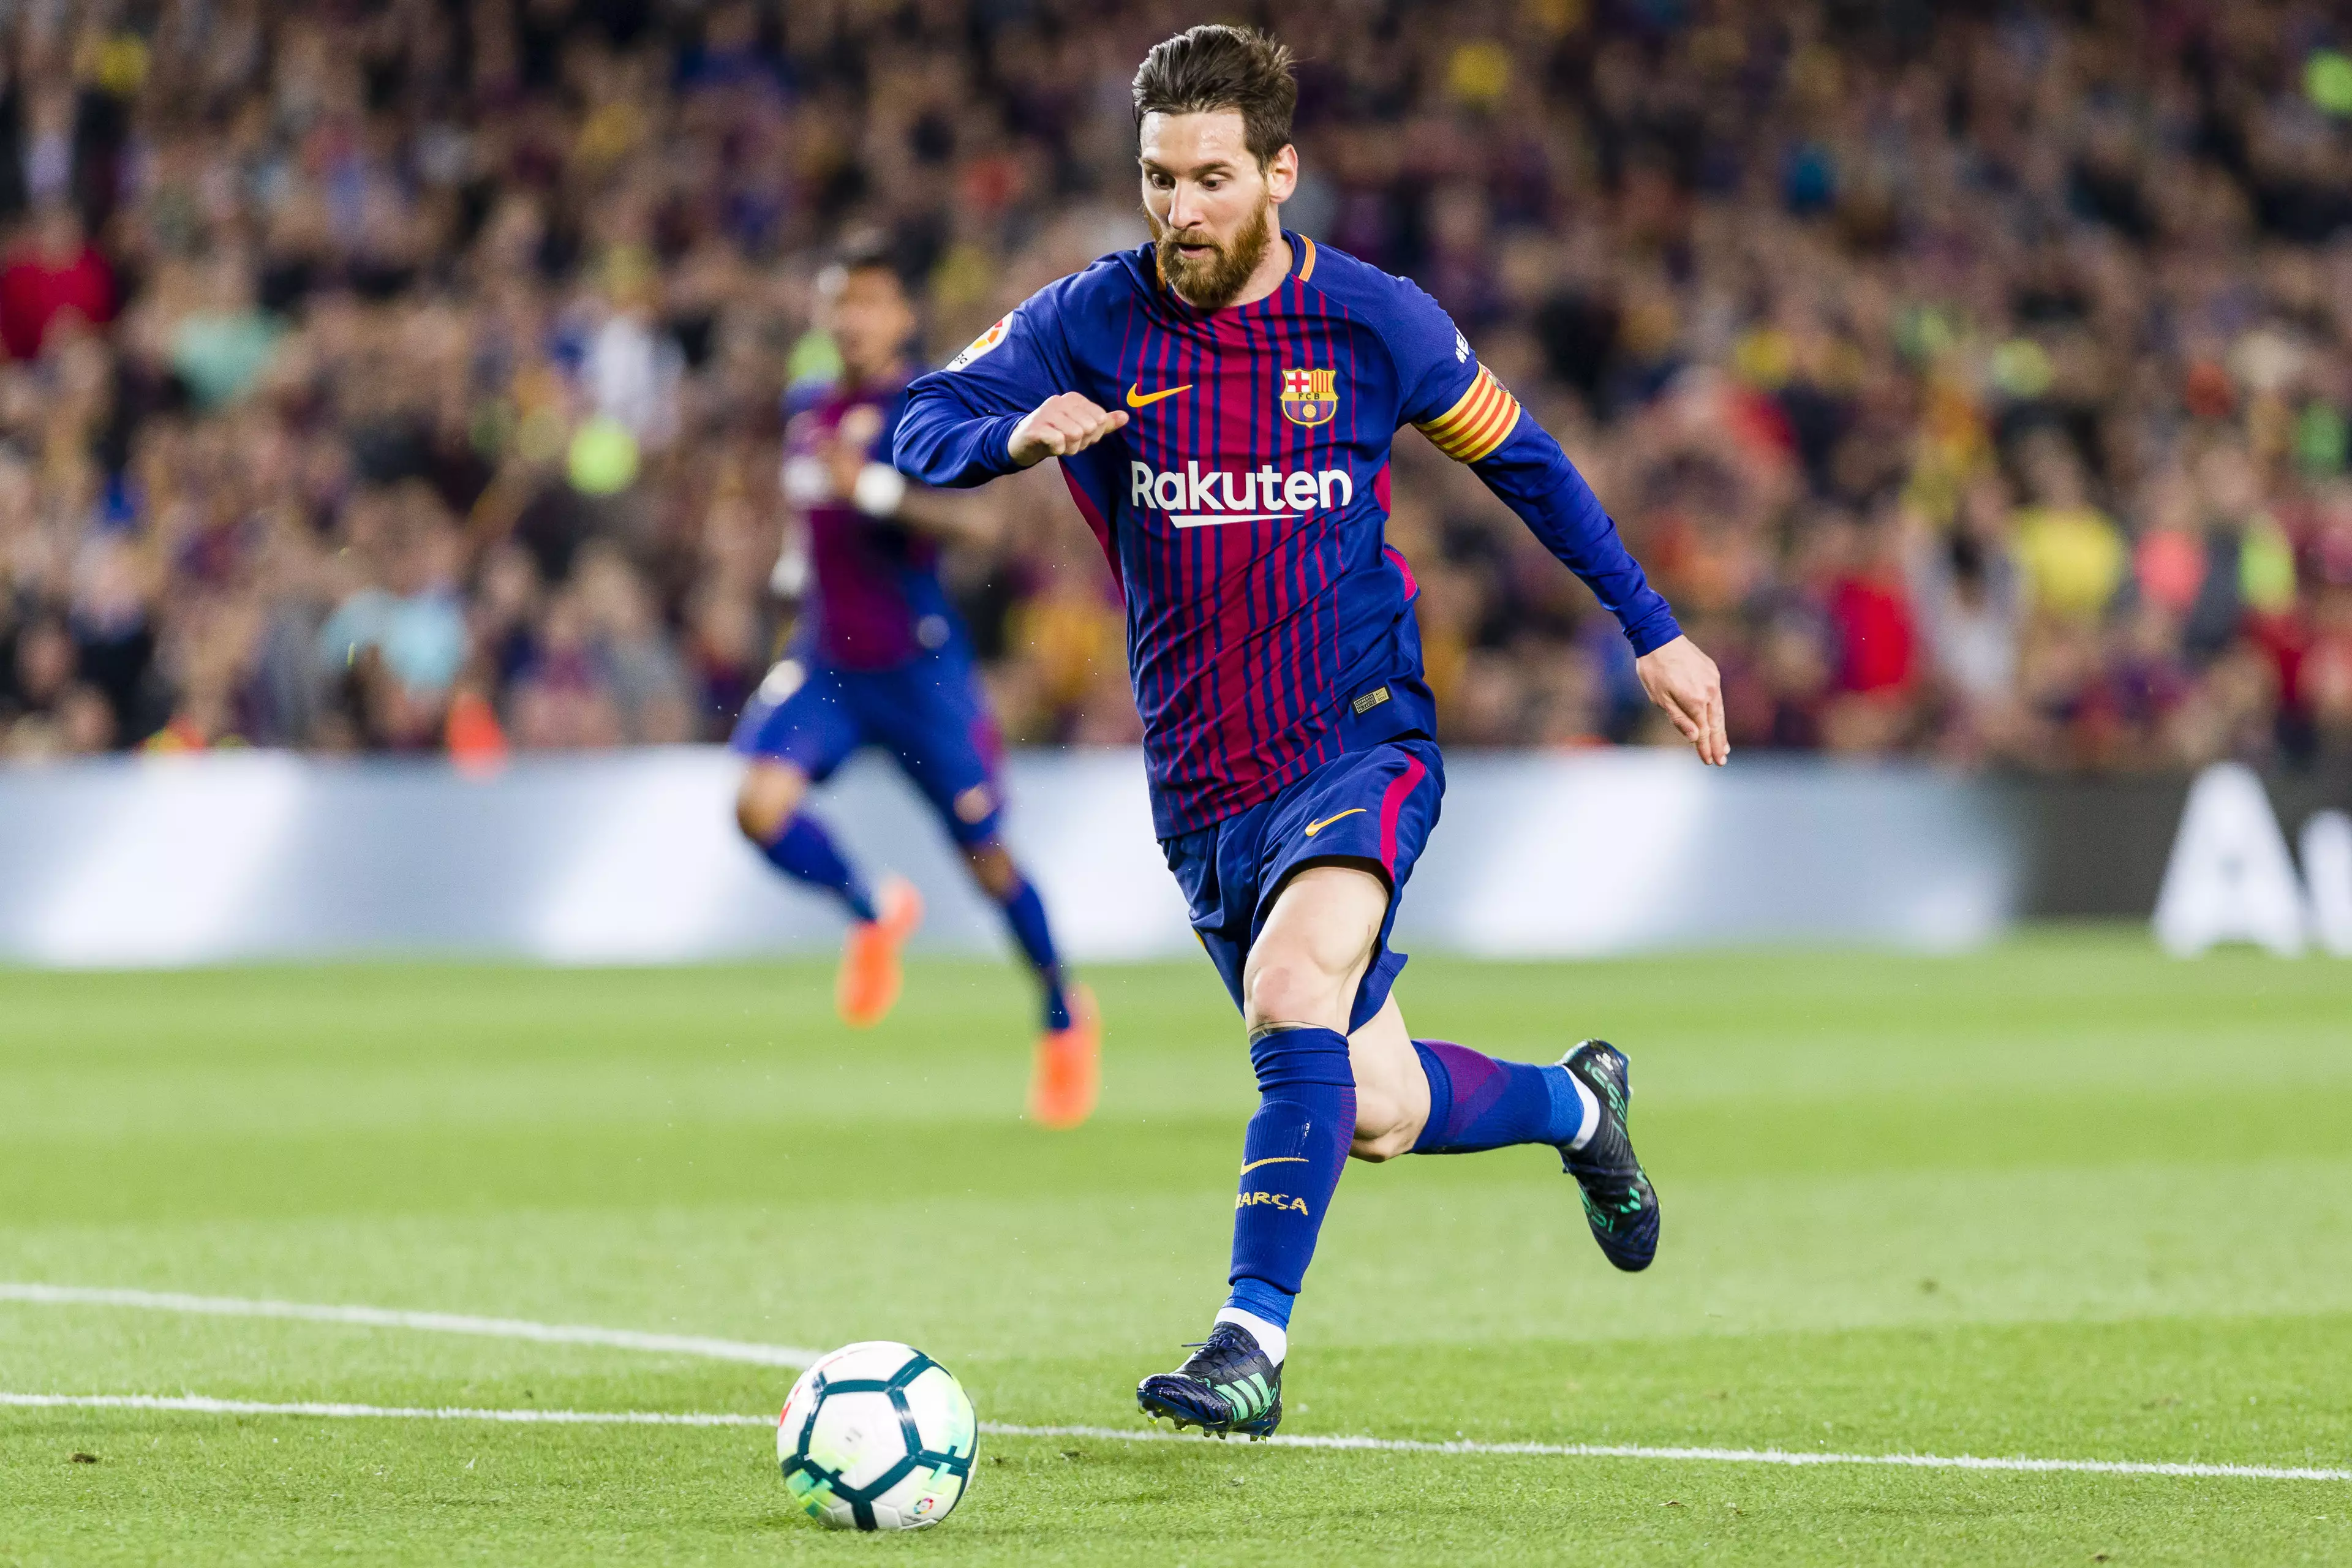 Messi in action for Barcelona. Image: PA